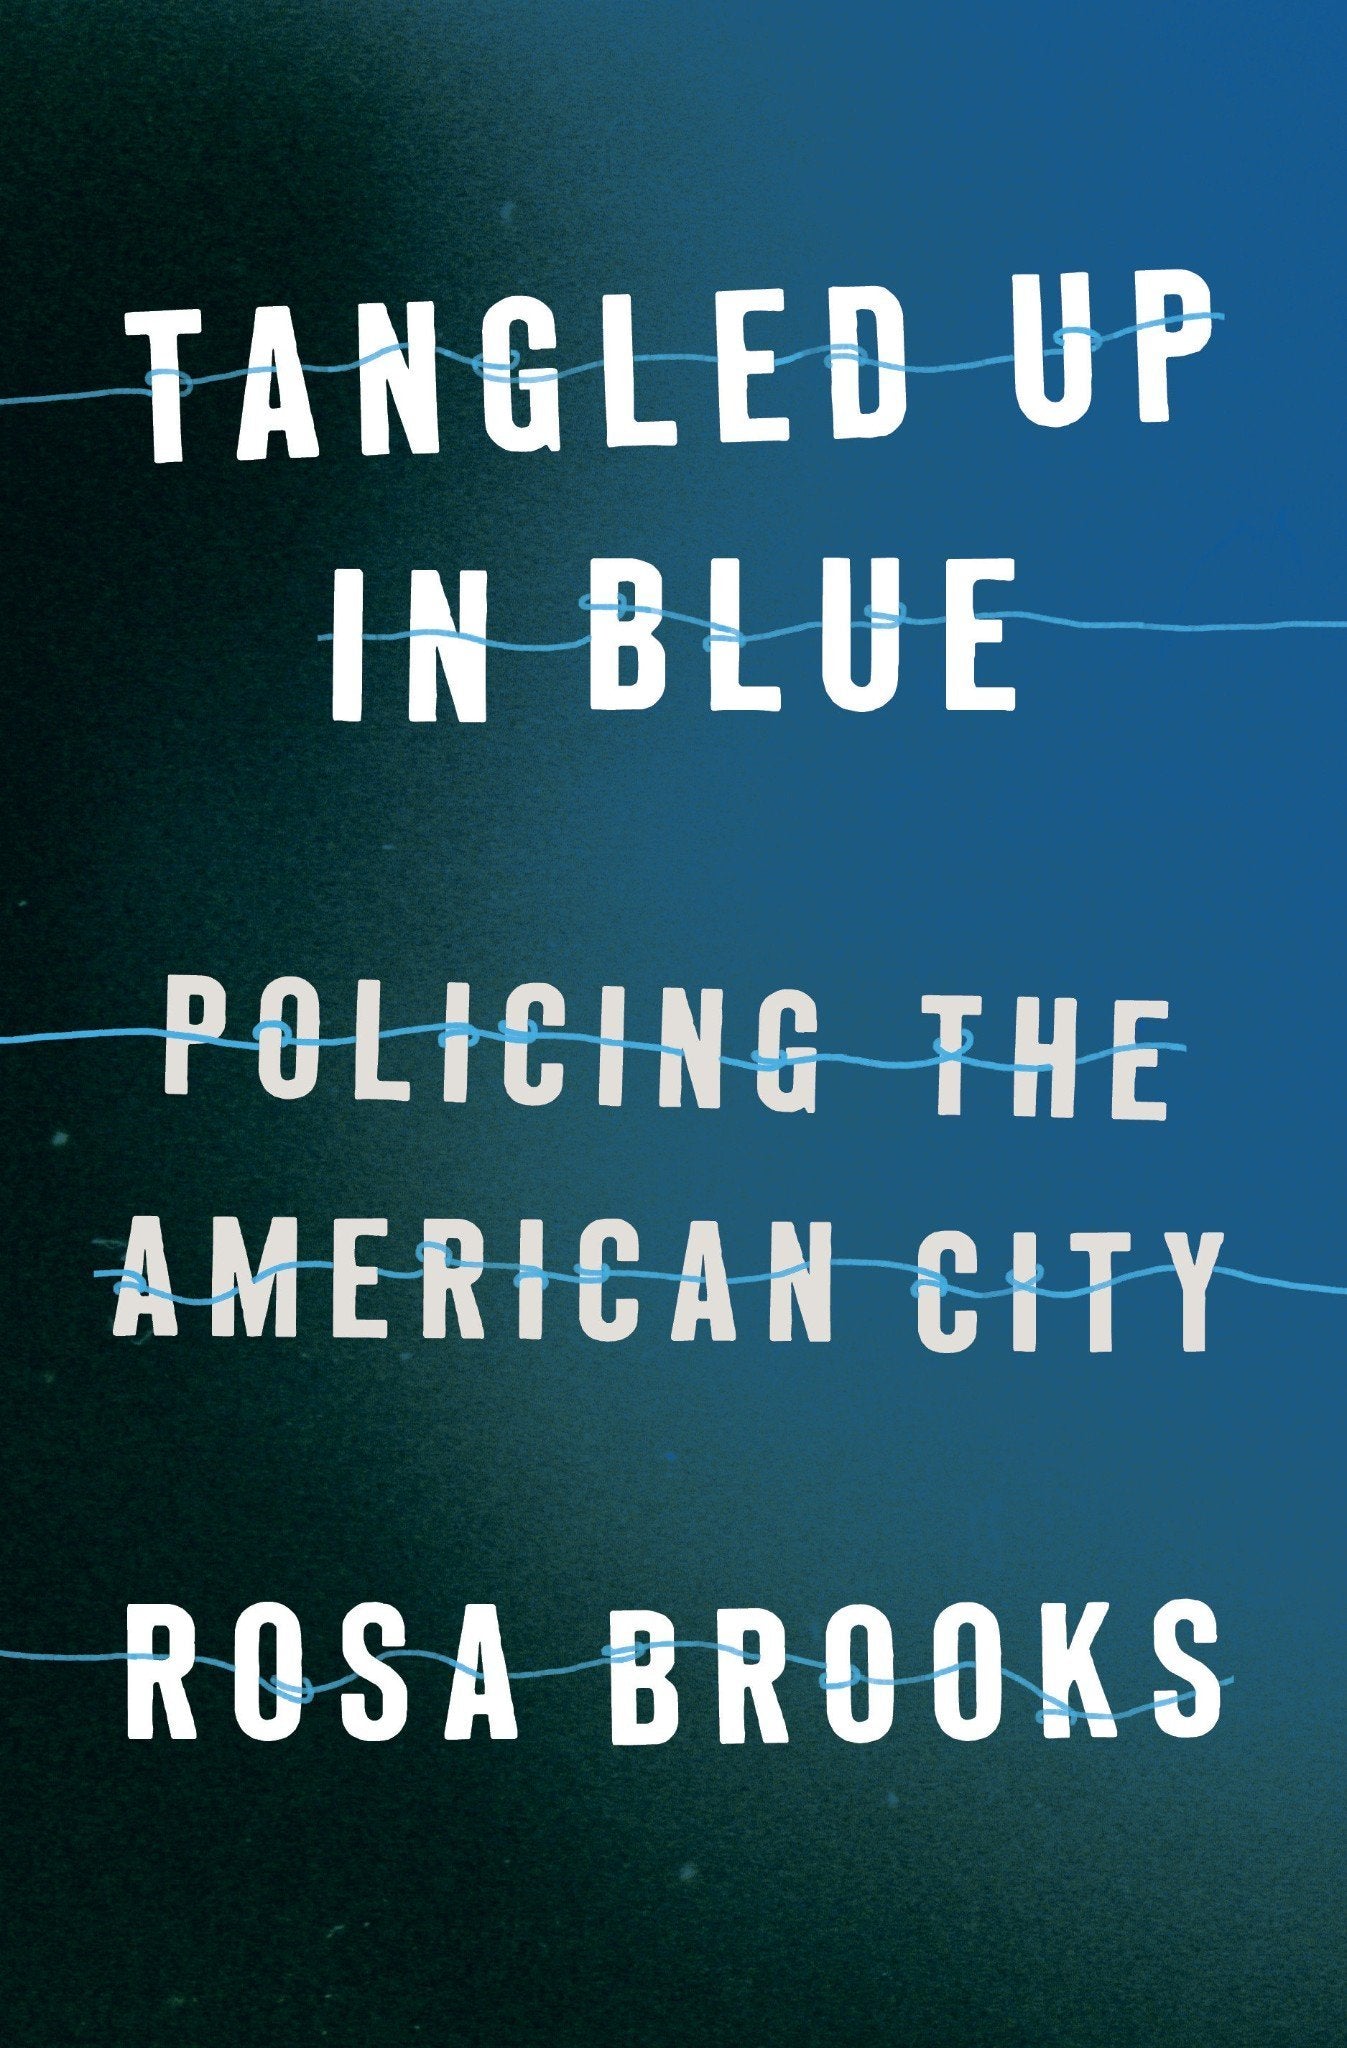 Tangled Up in Blue: Policing the American City by Rosa Brooks - LV'S Global Media